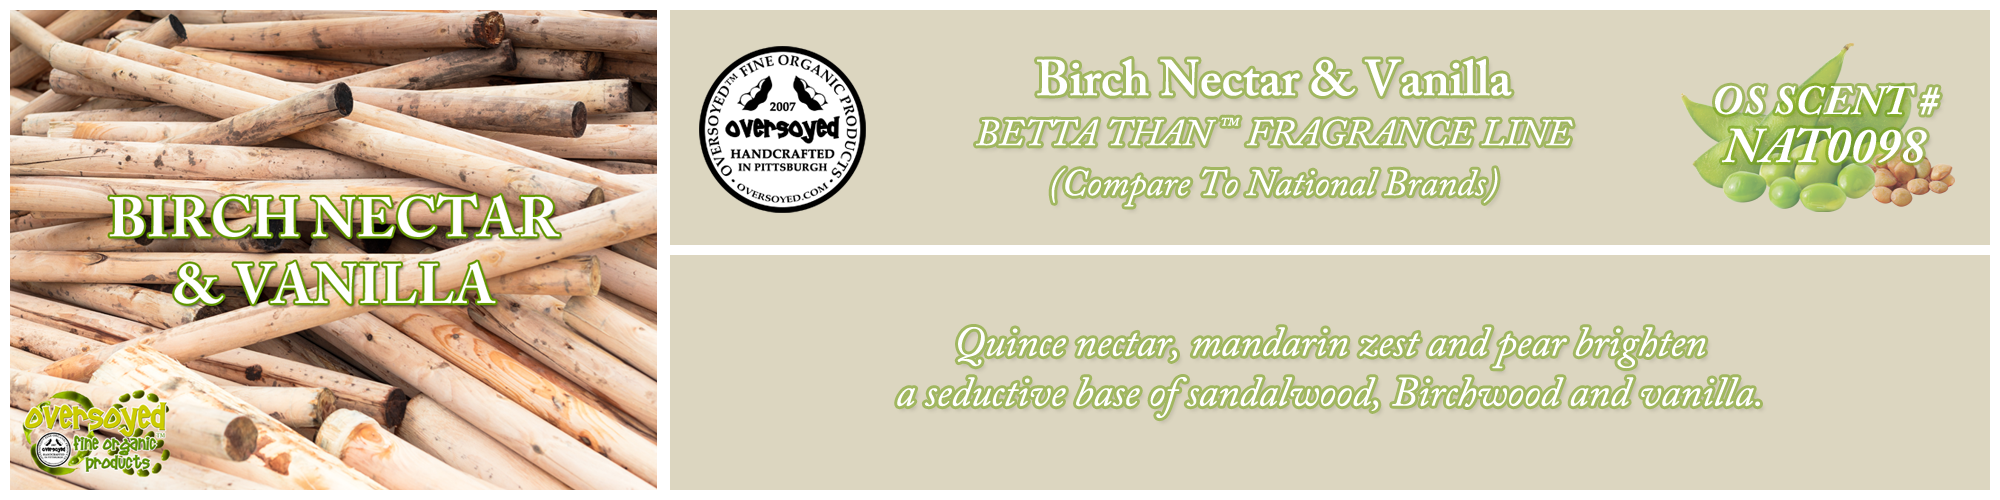 Birch Nectar & Vanilla Handcrafted Products Collection